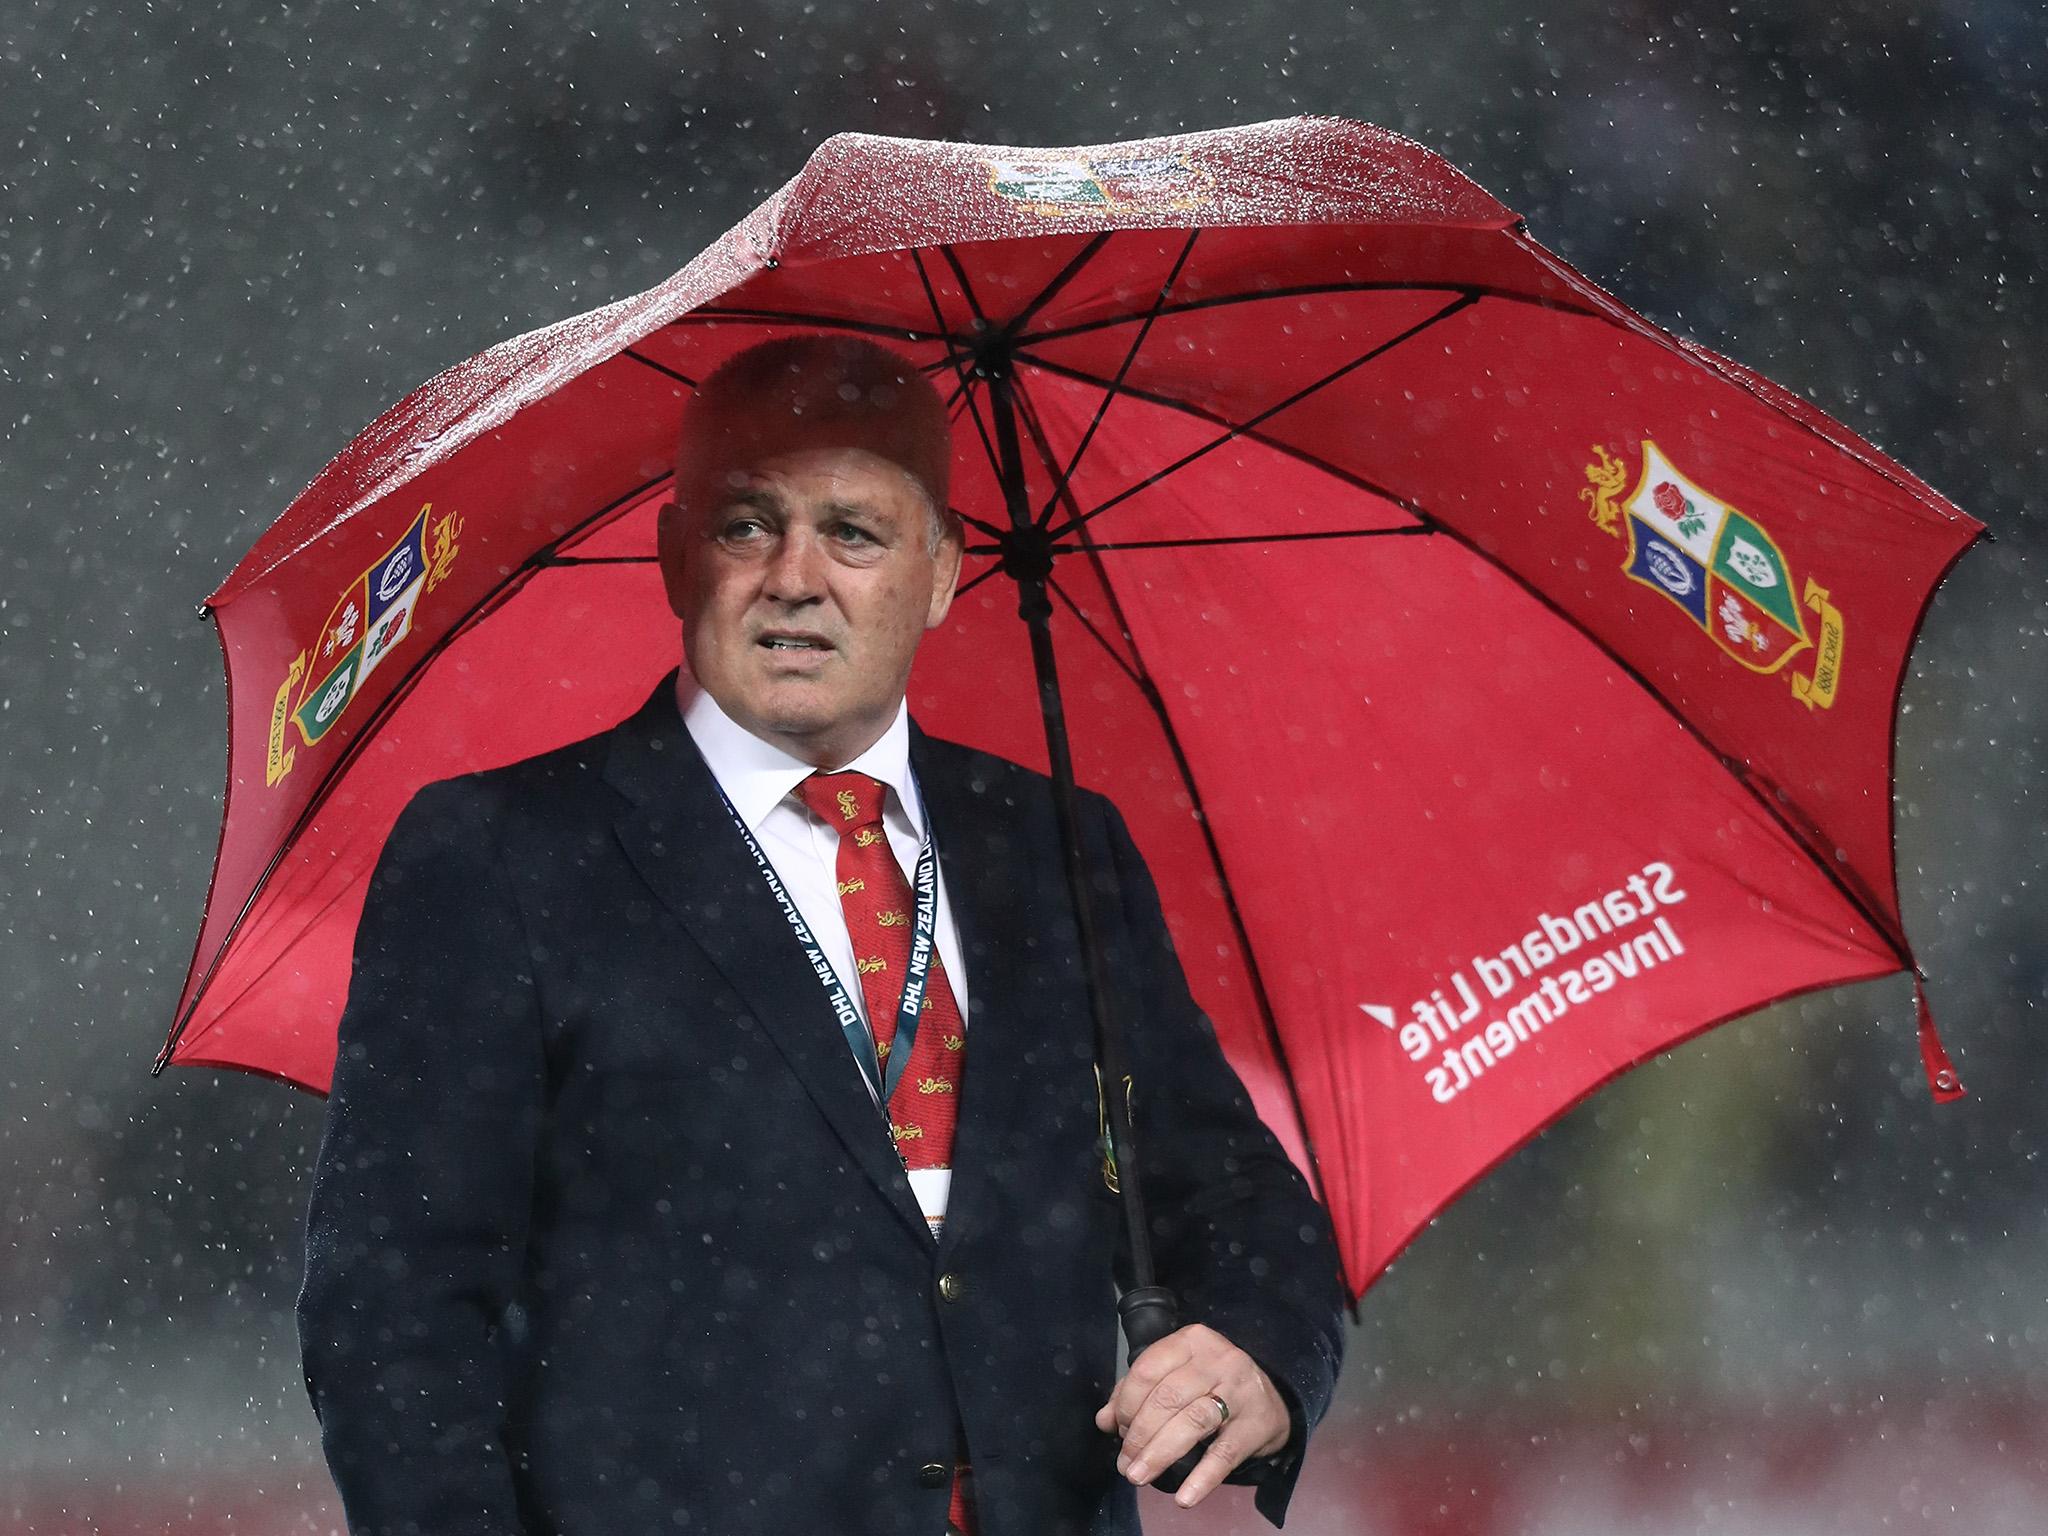 Things haven't quite clicked yet for Gatland's men